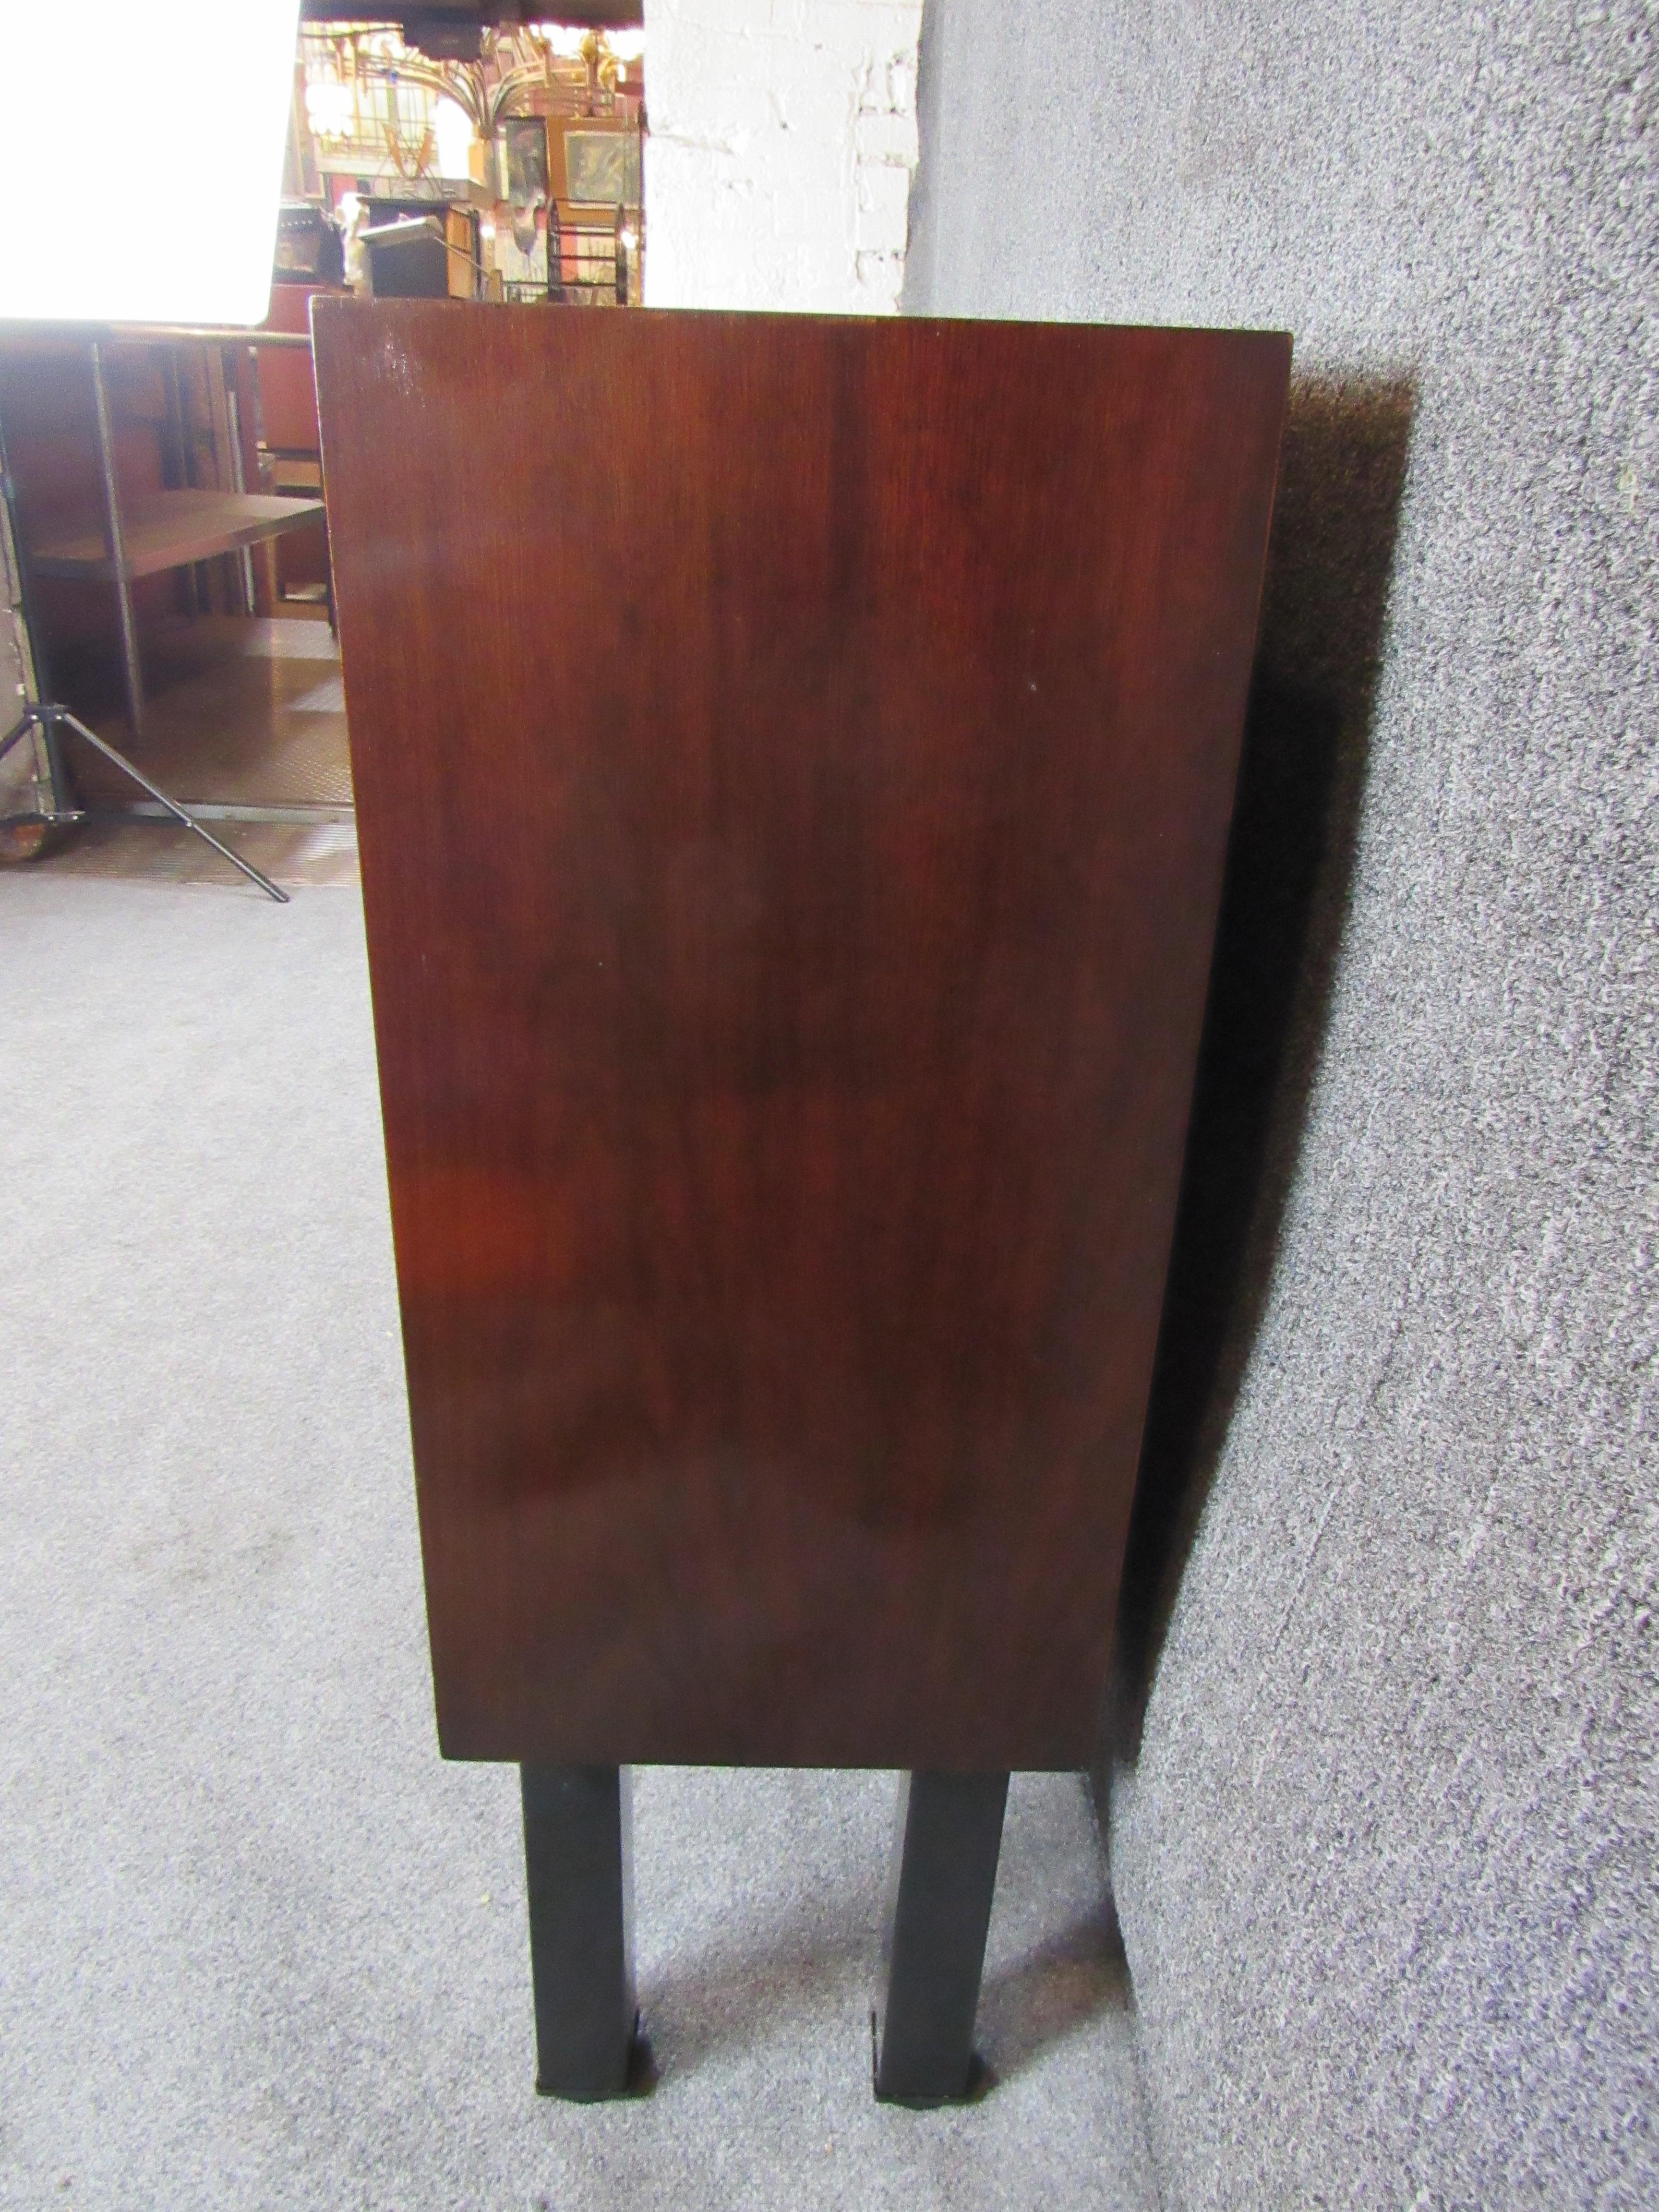 Wood Early George Nelson Basic Cabinet by Herman Miller